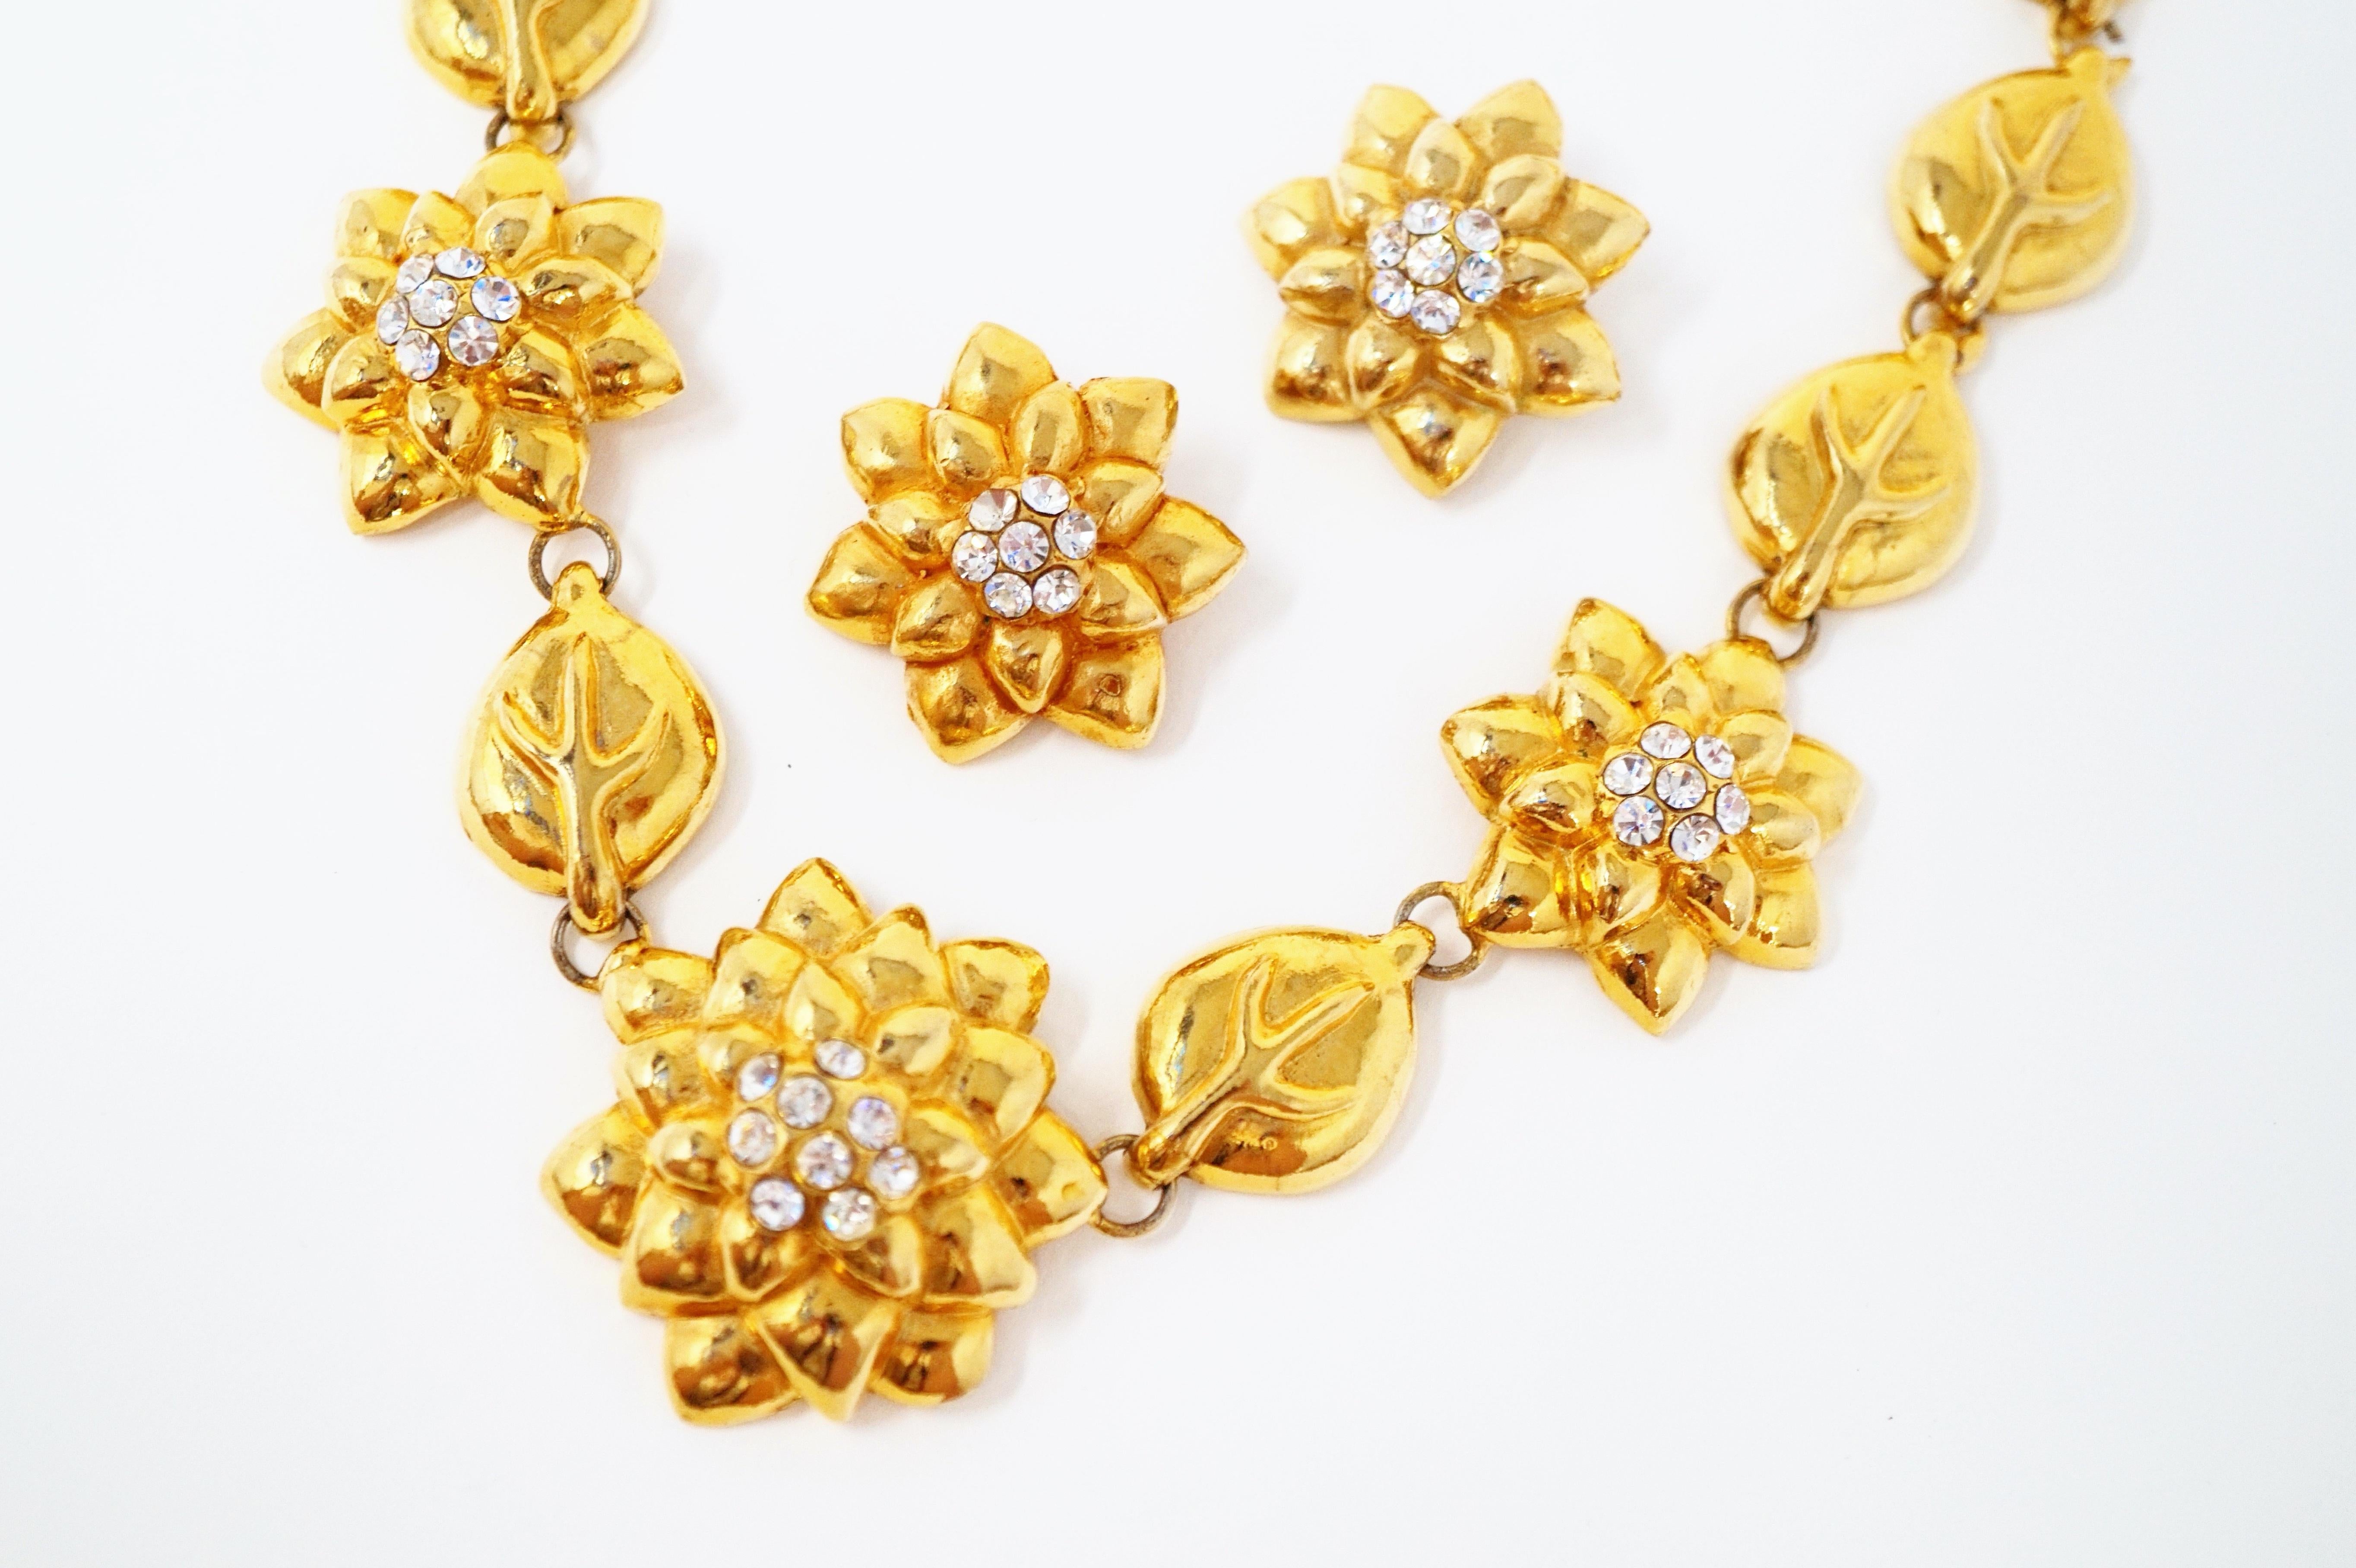 Early Lorenz Baumer Gilded Floral Necklace & Earrings Set, Signed, 1980s In Excellent Condition For Sale In McKinney, TX